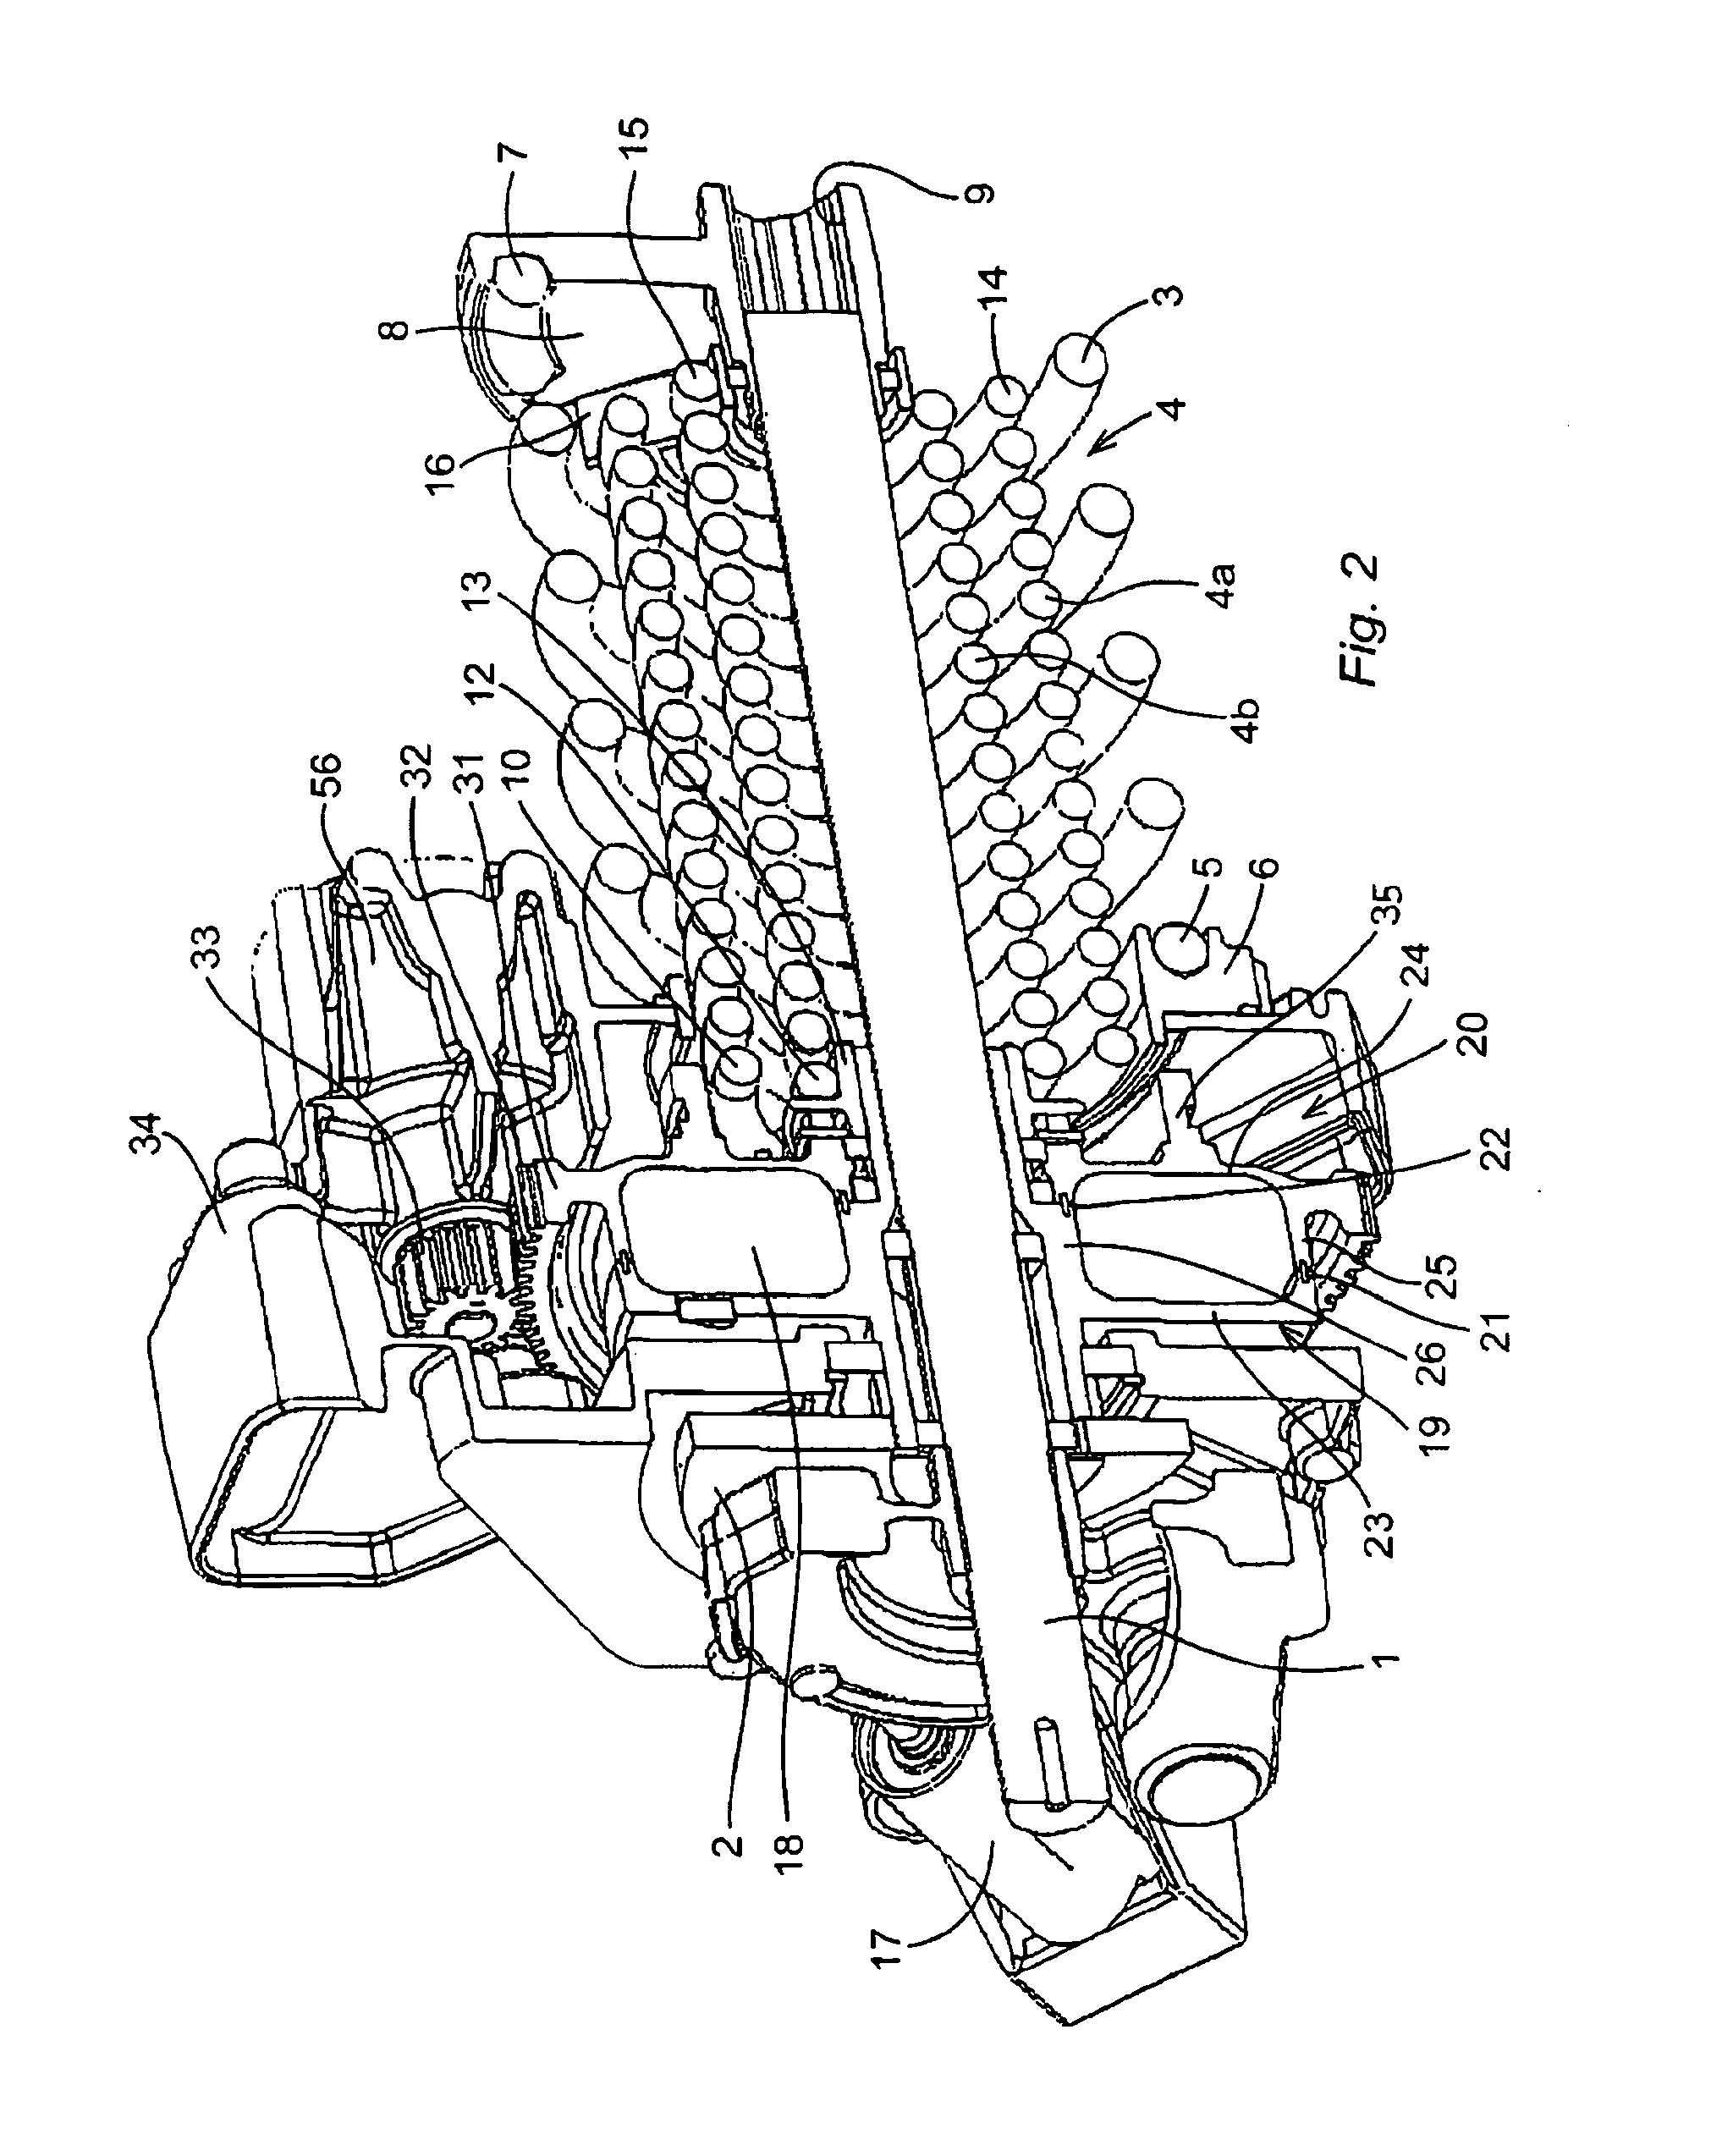 Spring operated switch actuator with damper for an electrical switching apparatus